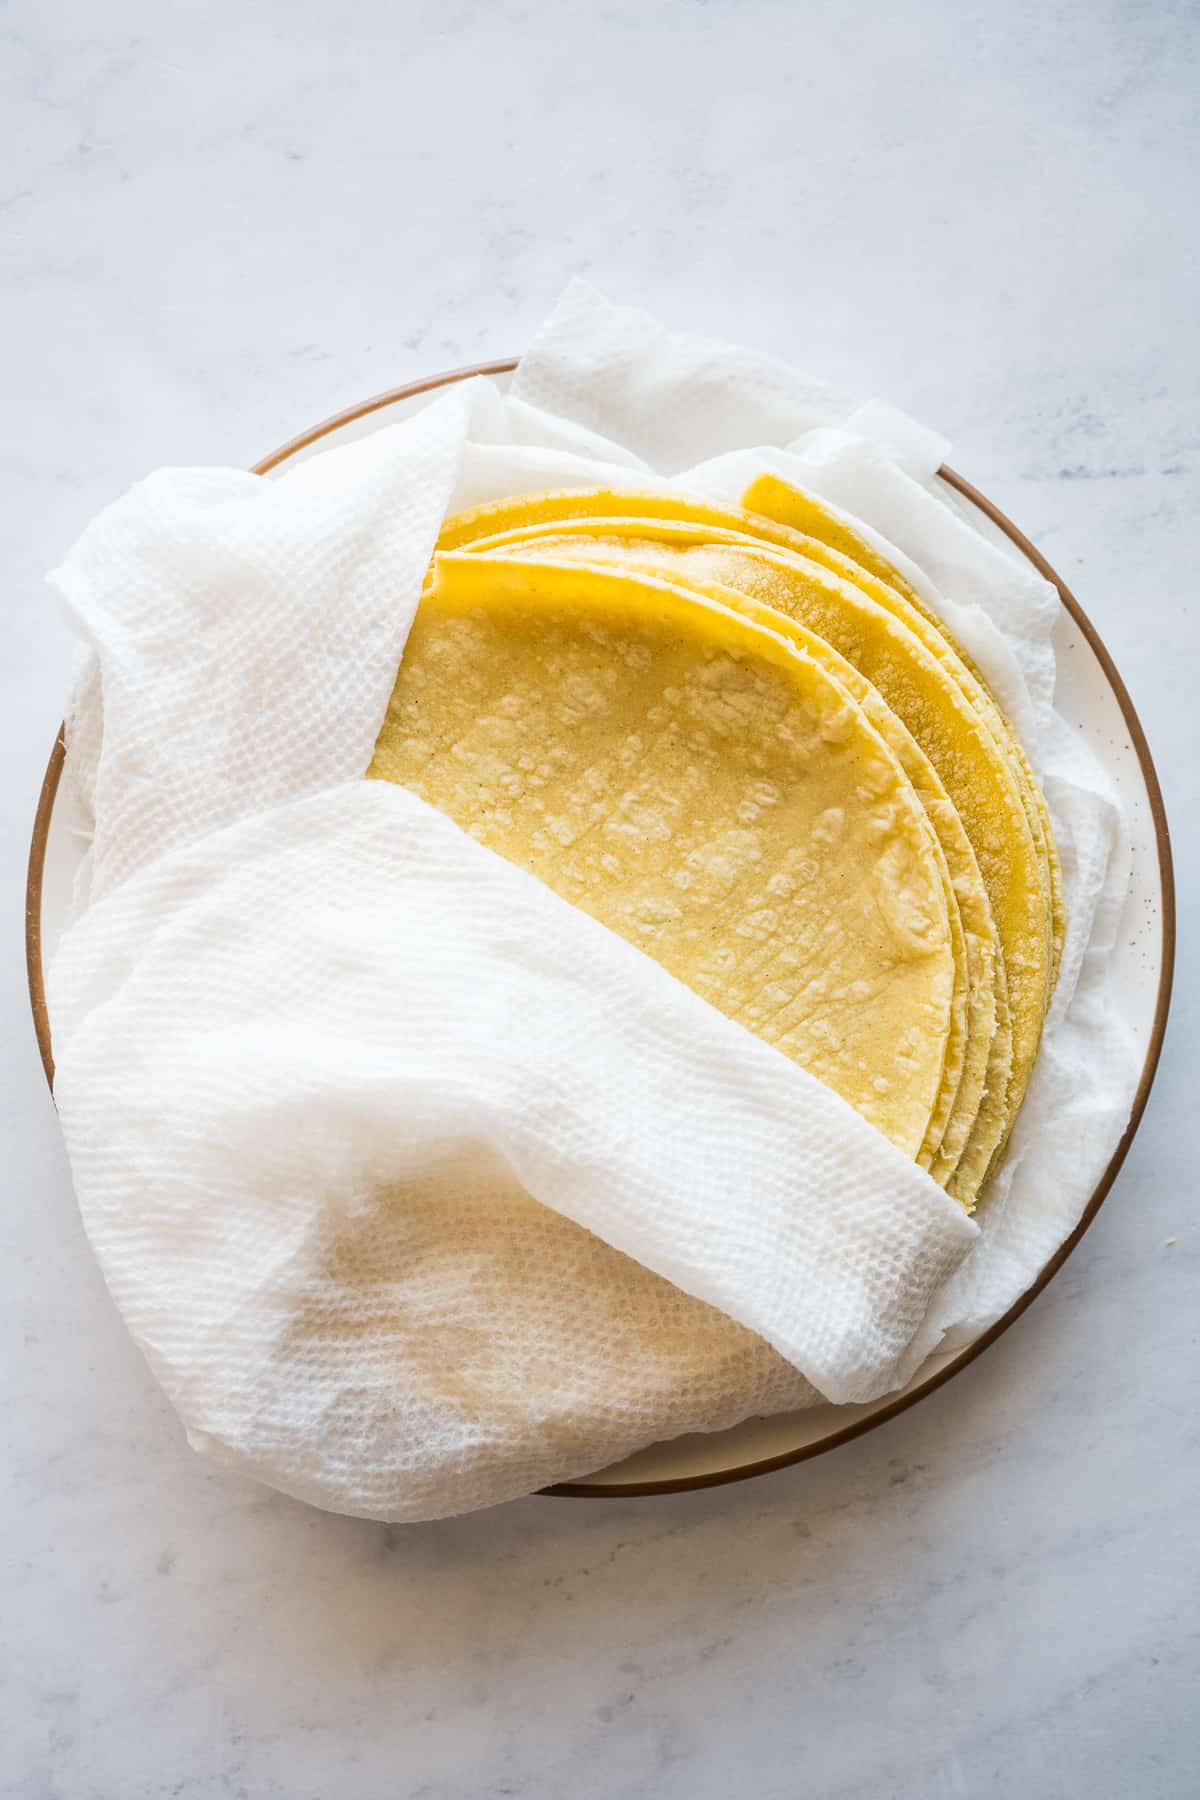 Corn tortillas wrapped in a damp paper towel to keep them moist when being warmed in the microwave.